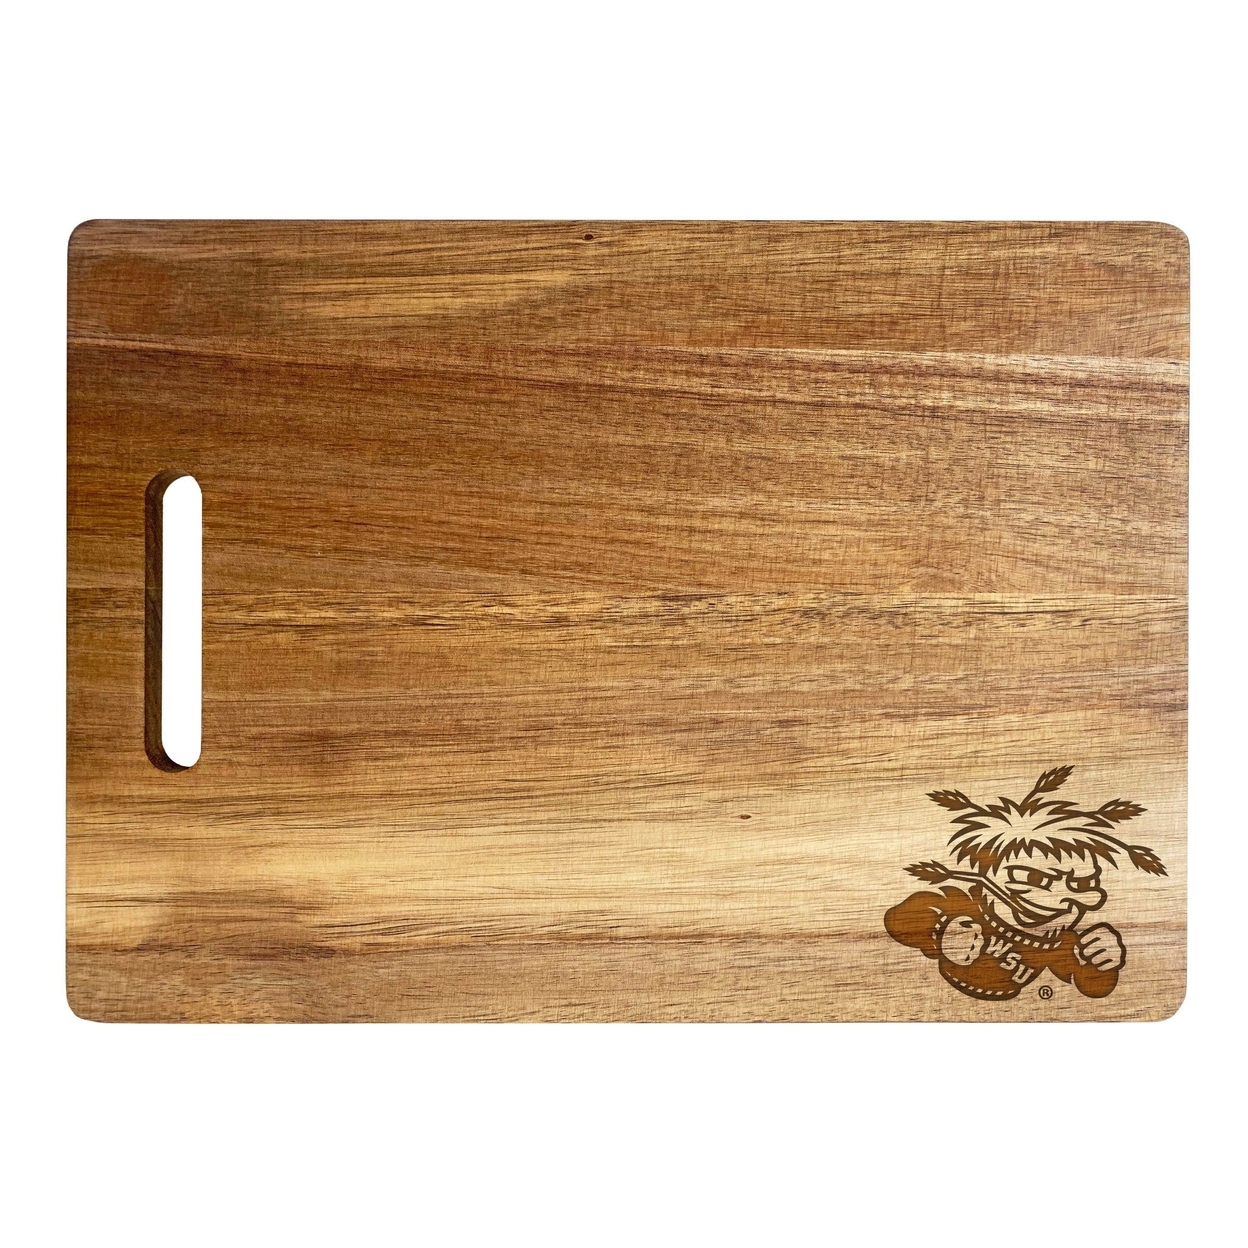 Wichita State Shockers Engraved Wooden Cutting Board 10 X 14 Acacia Wood - Small Engraving